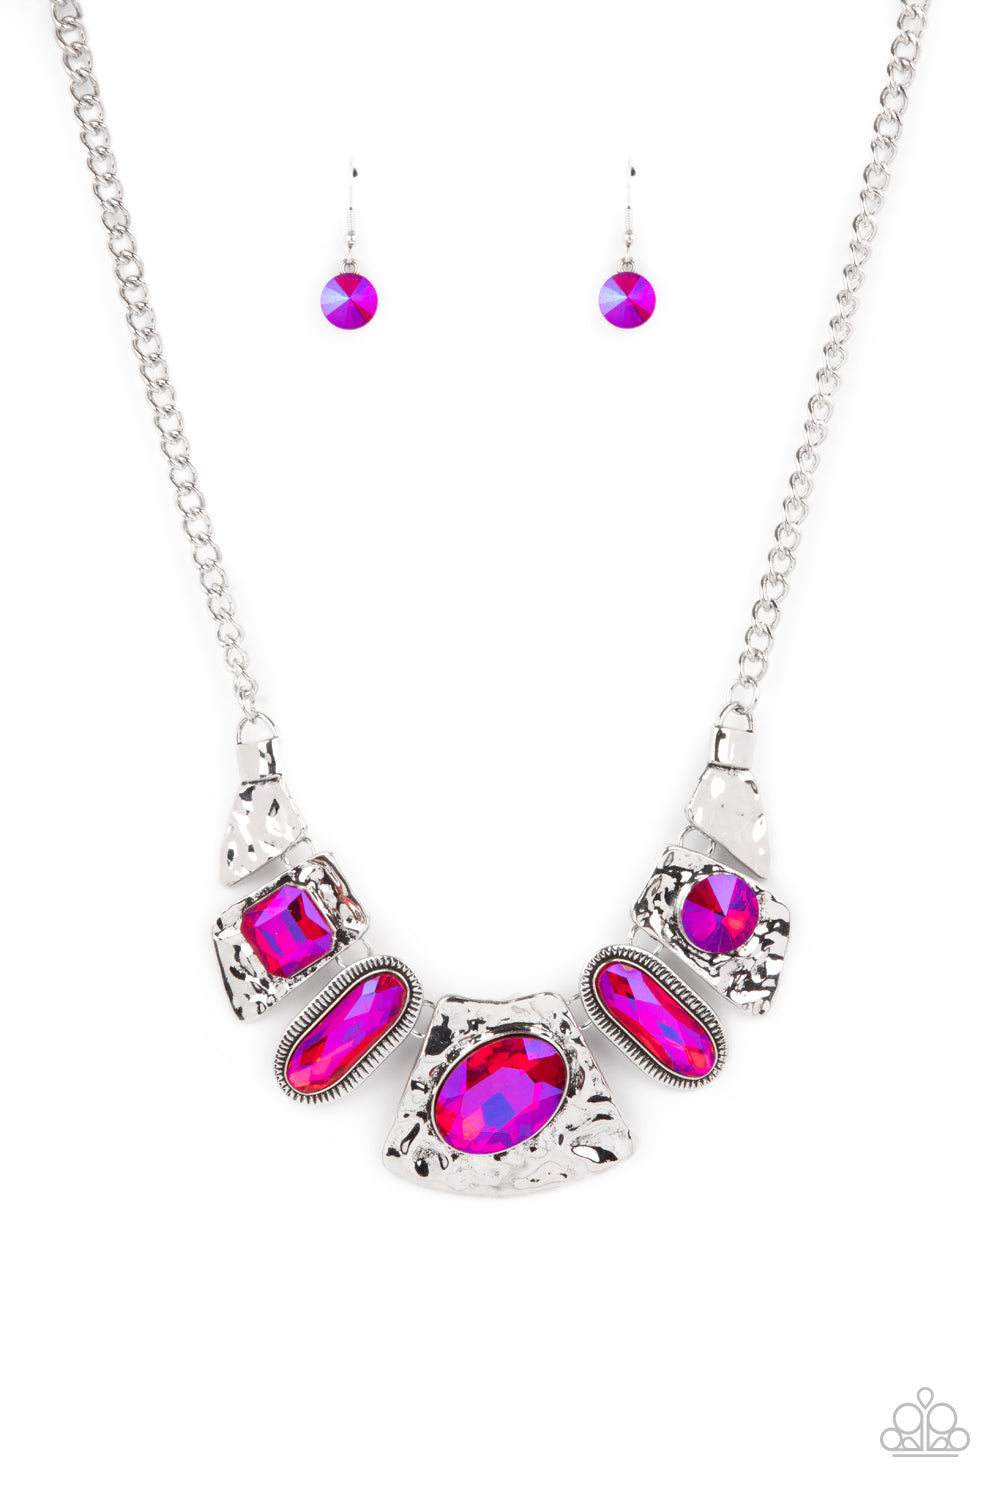 Futuristic Fashionista - Paparazzi - Pink Iridescent Silver Hammered Frame EMP Exclusive Necklace